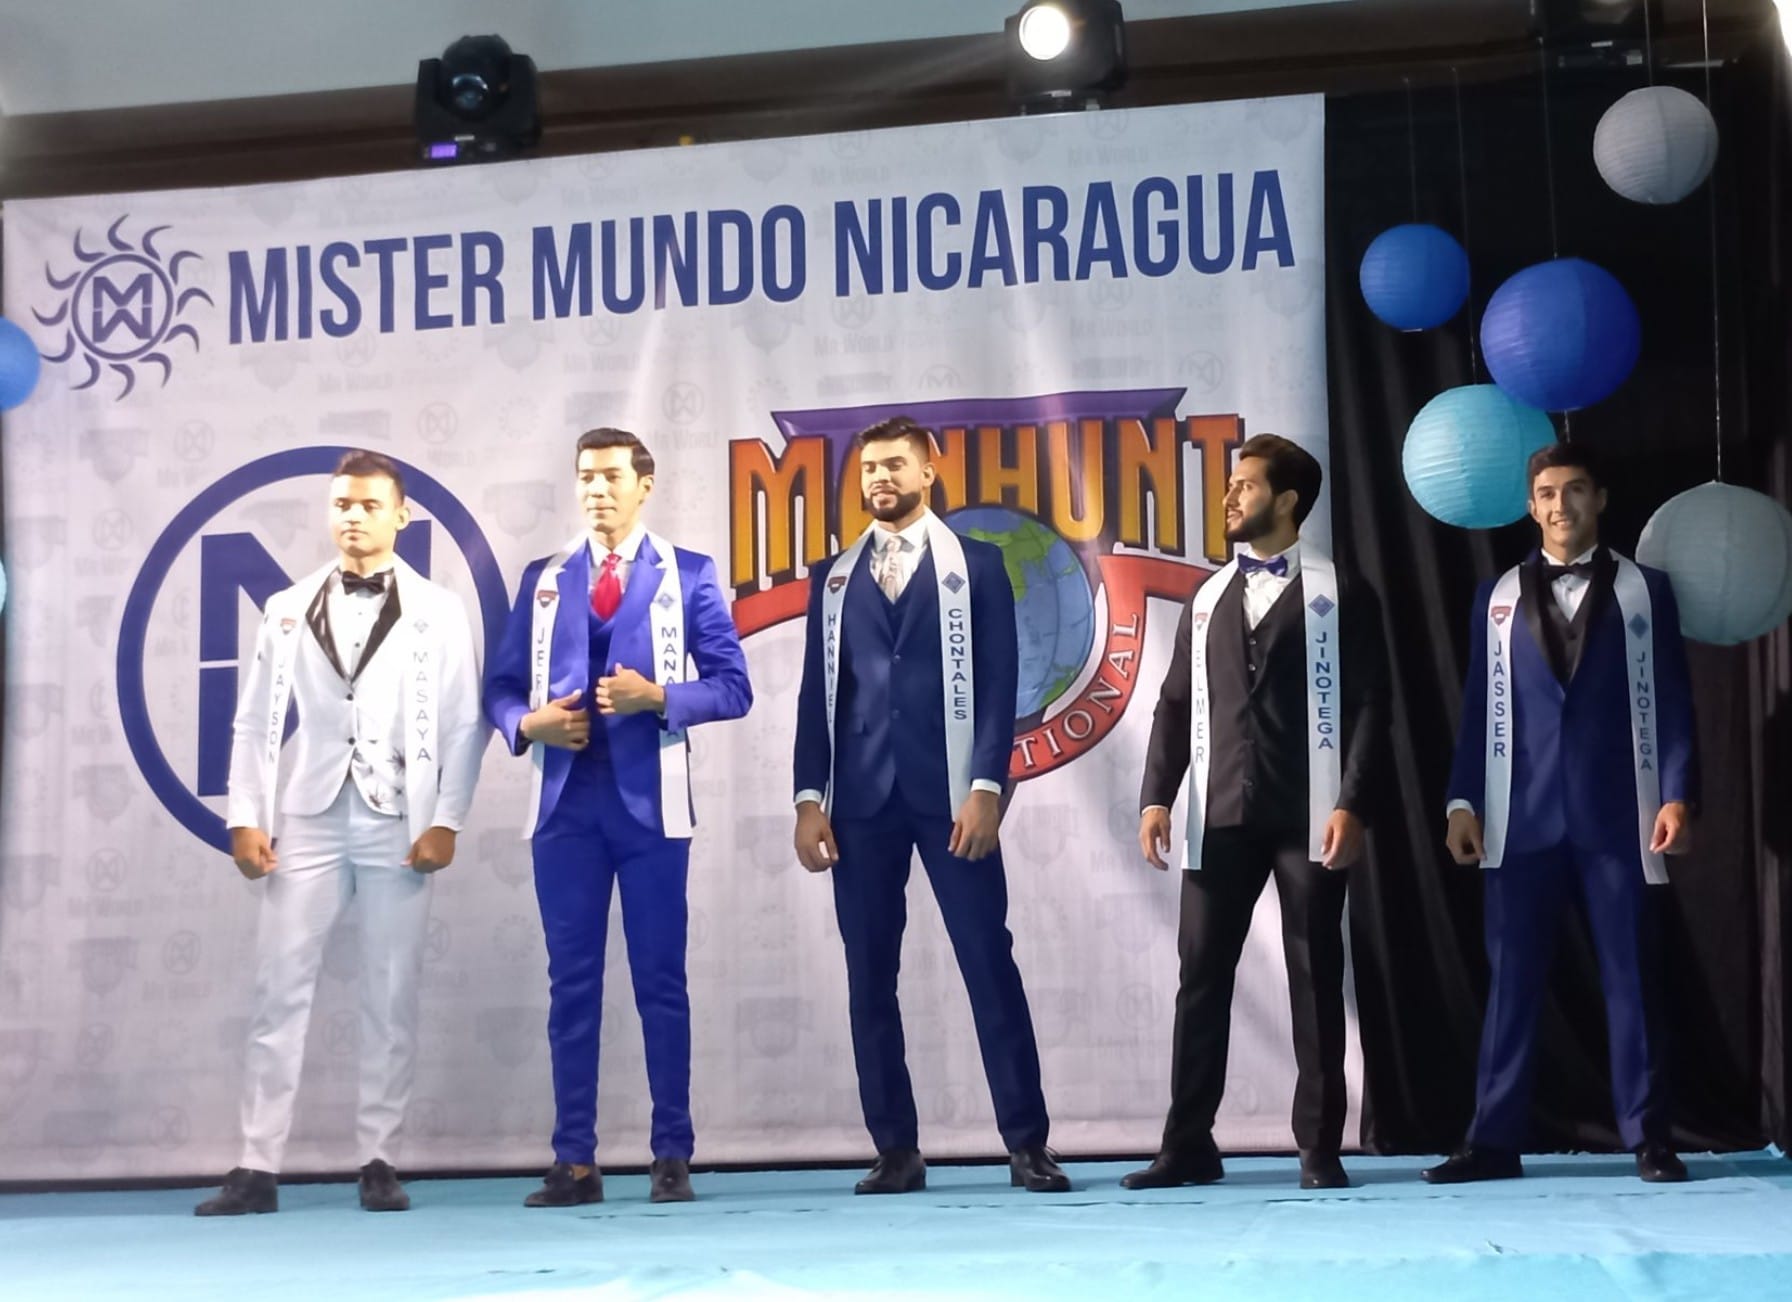 A native from Chontales crowned Mister Mundo Nicaragua 2022 and Manhunt Nicaragua 2022